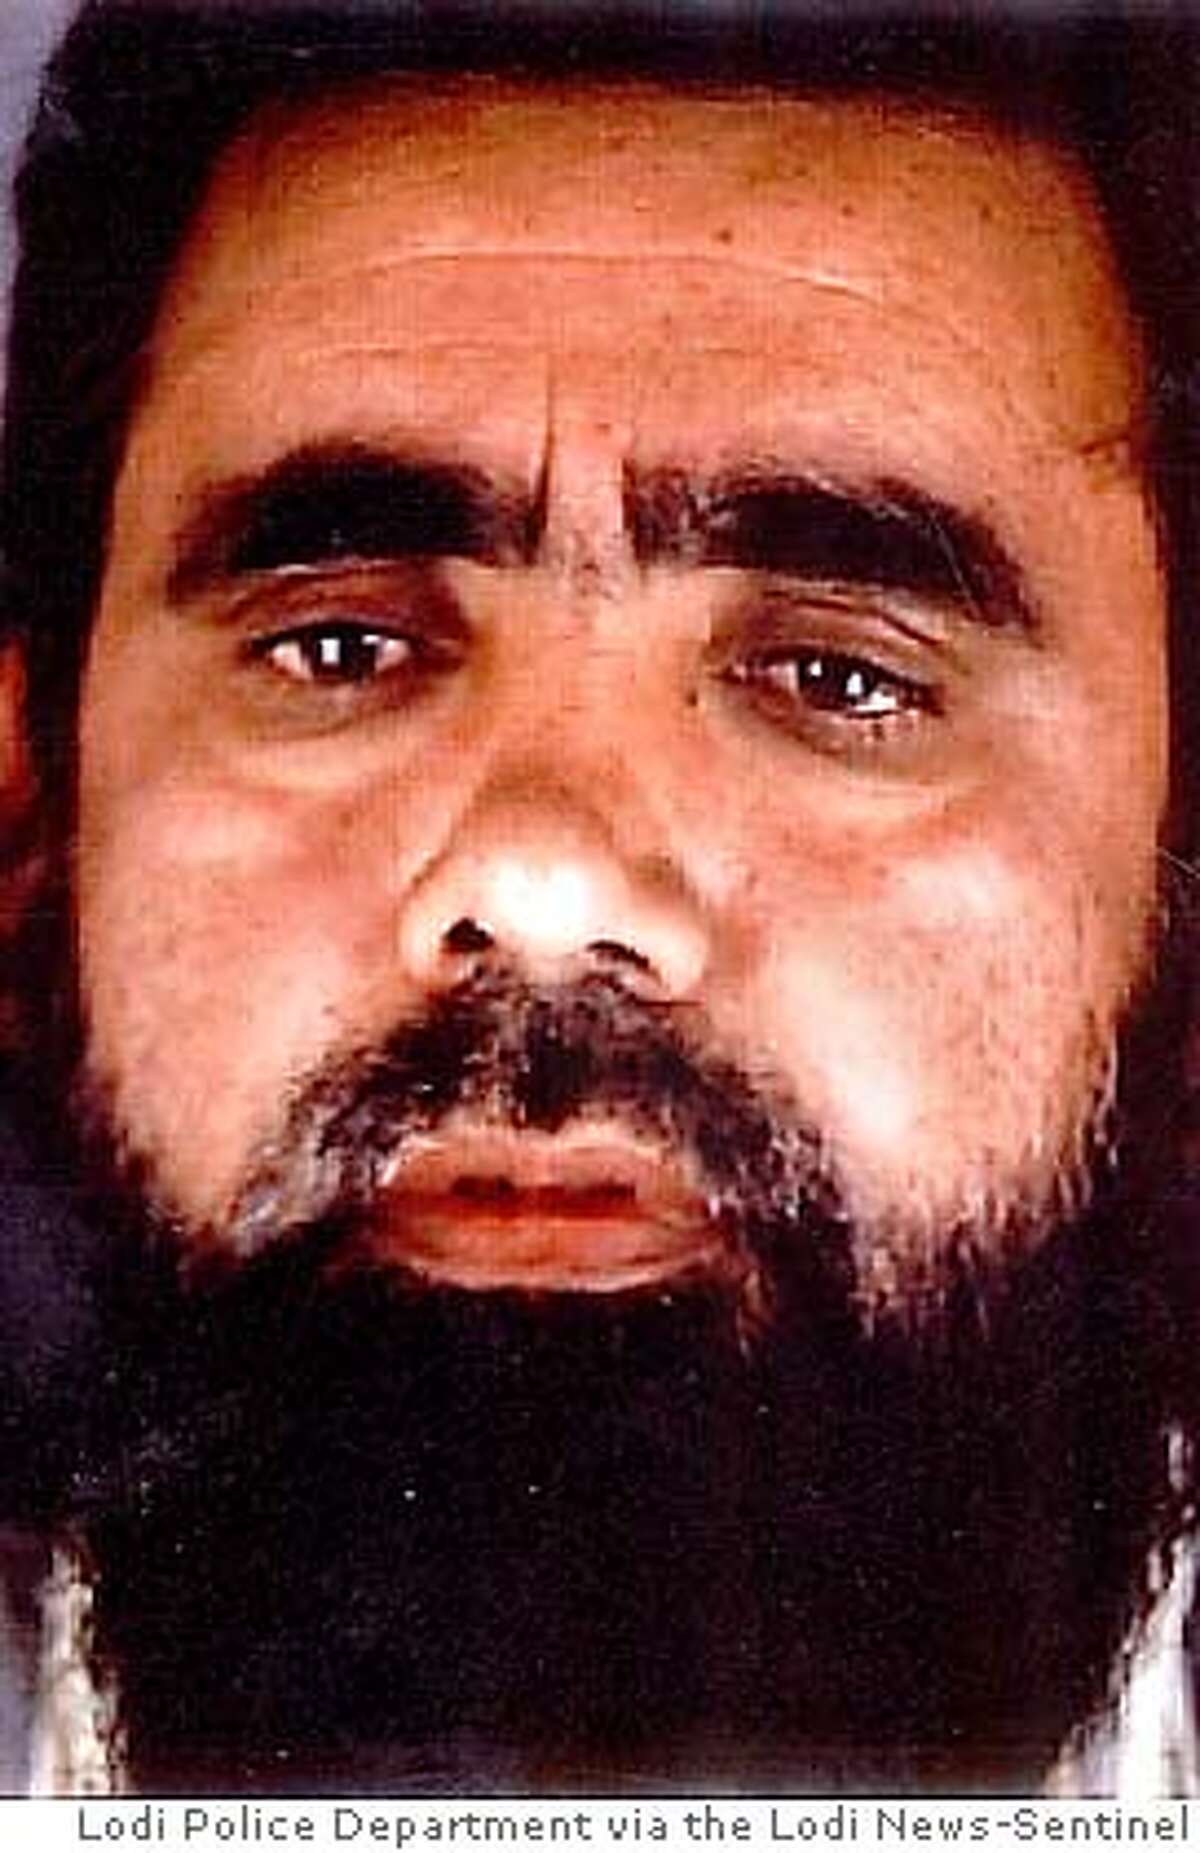 ** FILE ** This is an undated photo of Umer Hayat provided by the Lodi (Calif.) Police Department. Hayat, 47, was indicted on a single count of lying to investigators when he denied that his son had attended training camps connected to al-Qaida. Hayat later admitted flying his son to Pakistan and paying for the camp, which was run by the friend of a relative. U.S. District Judge Garland E. Burrell Jr. on Friday, July 1, 2005, set the trial for Aug. 23 and placed the burden on the government to prove why the two men should not be tried quickly. (AP Photo/Lodi Police Department via the Lodi News-Sentinel)